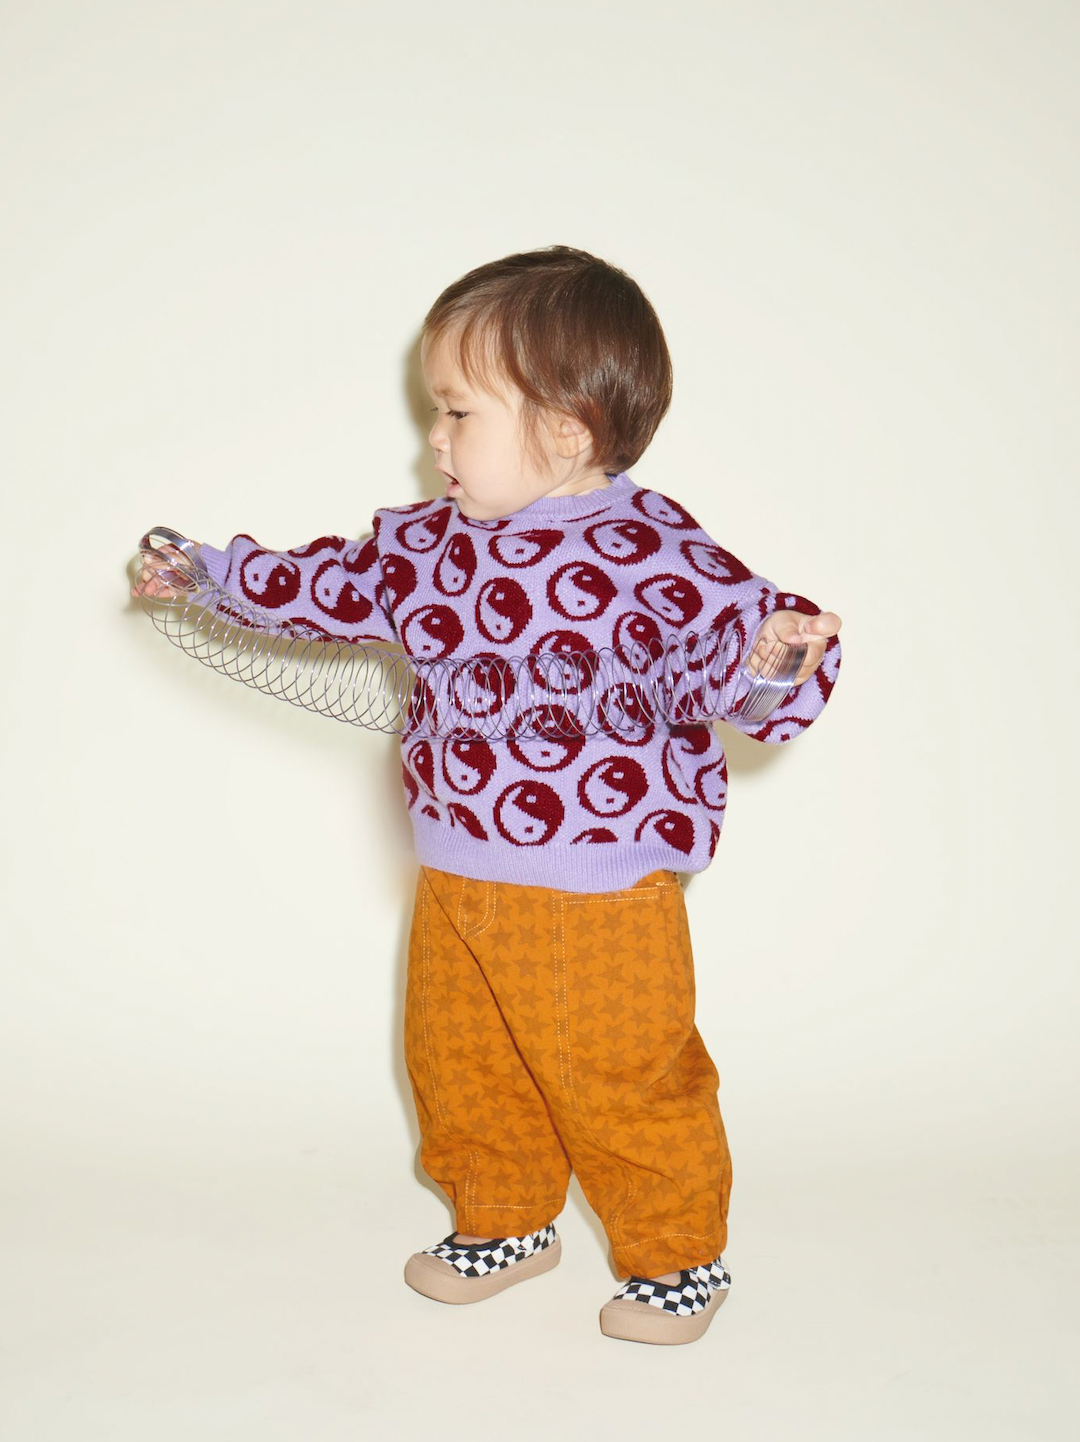 A toddler with a slinky wearing mary jane sneakers in black-and-white checkerboard, under First Place Pants in rust and a Cosmos Sweater in violet